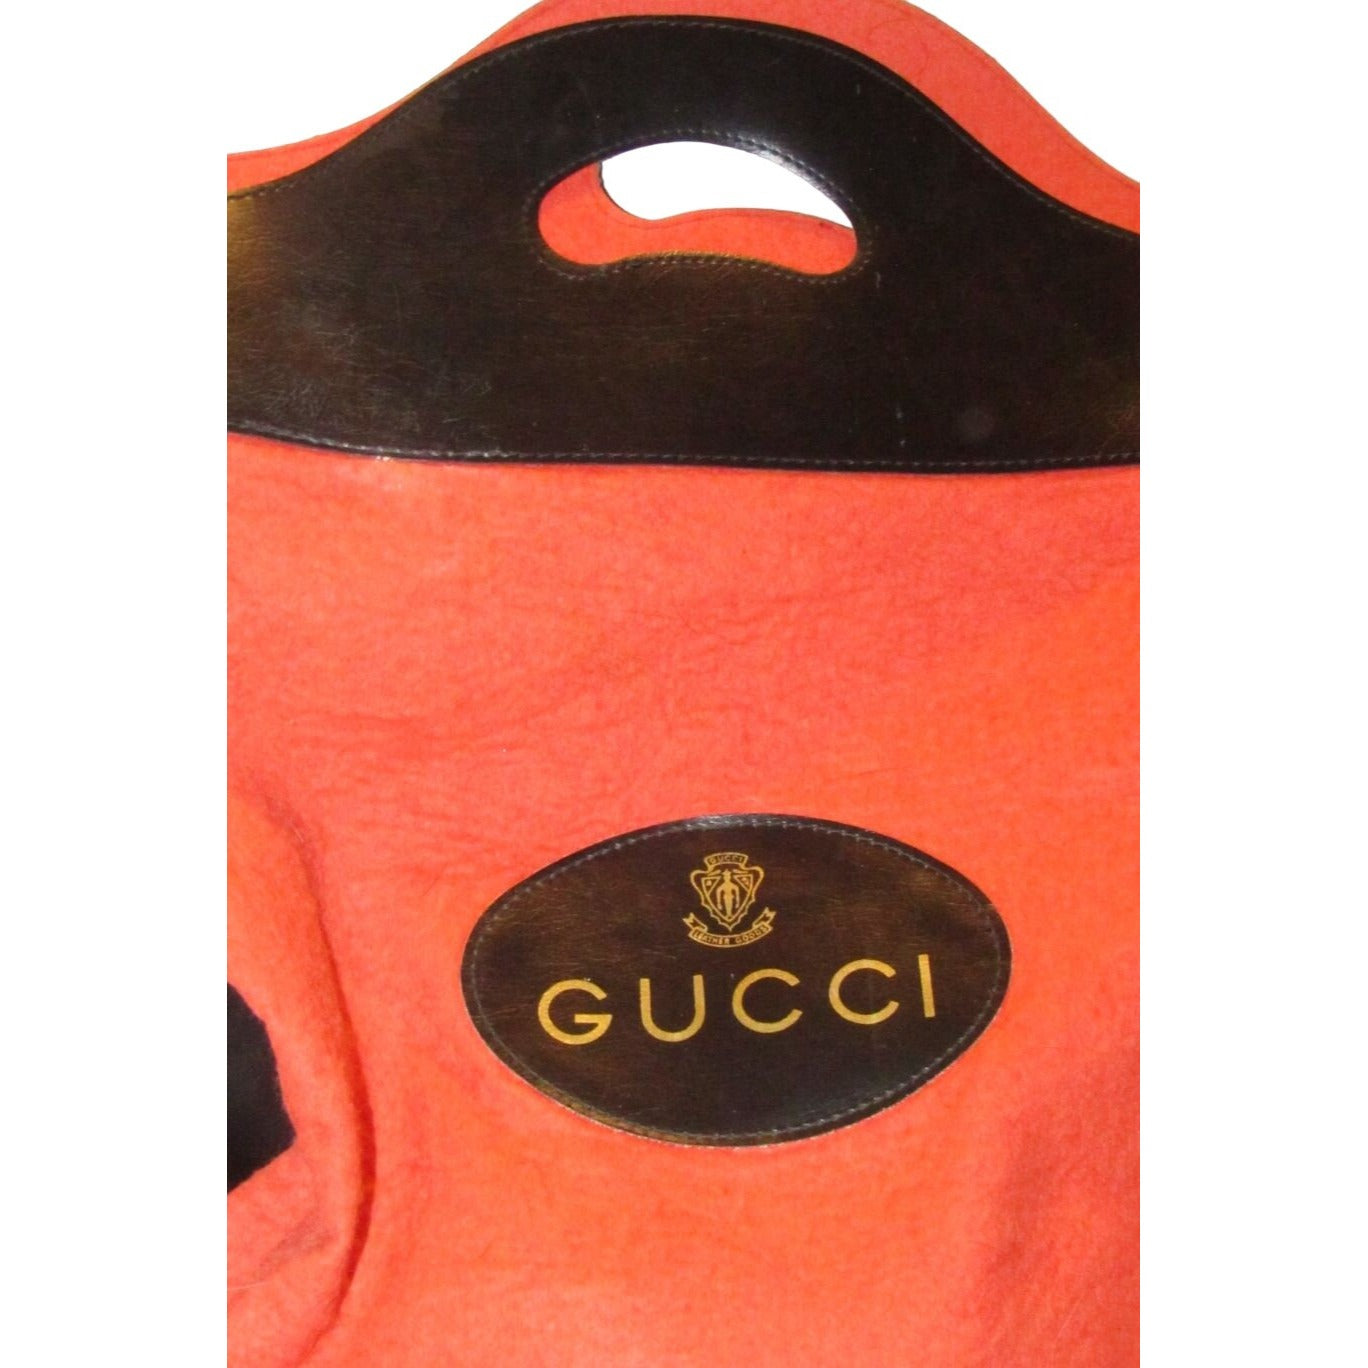 Vintage, Gucci, red soft wool & black leather, large tote with a leather oval with 'GUCCi' and the crest accent at the center